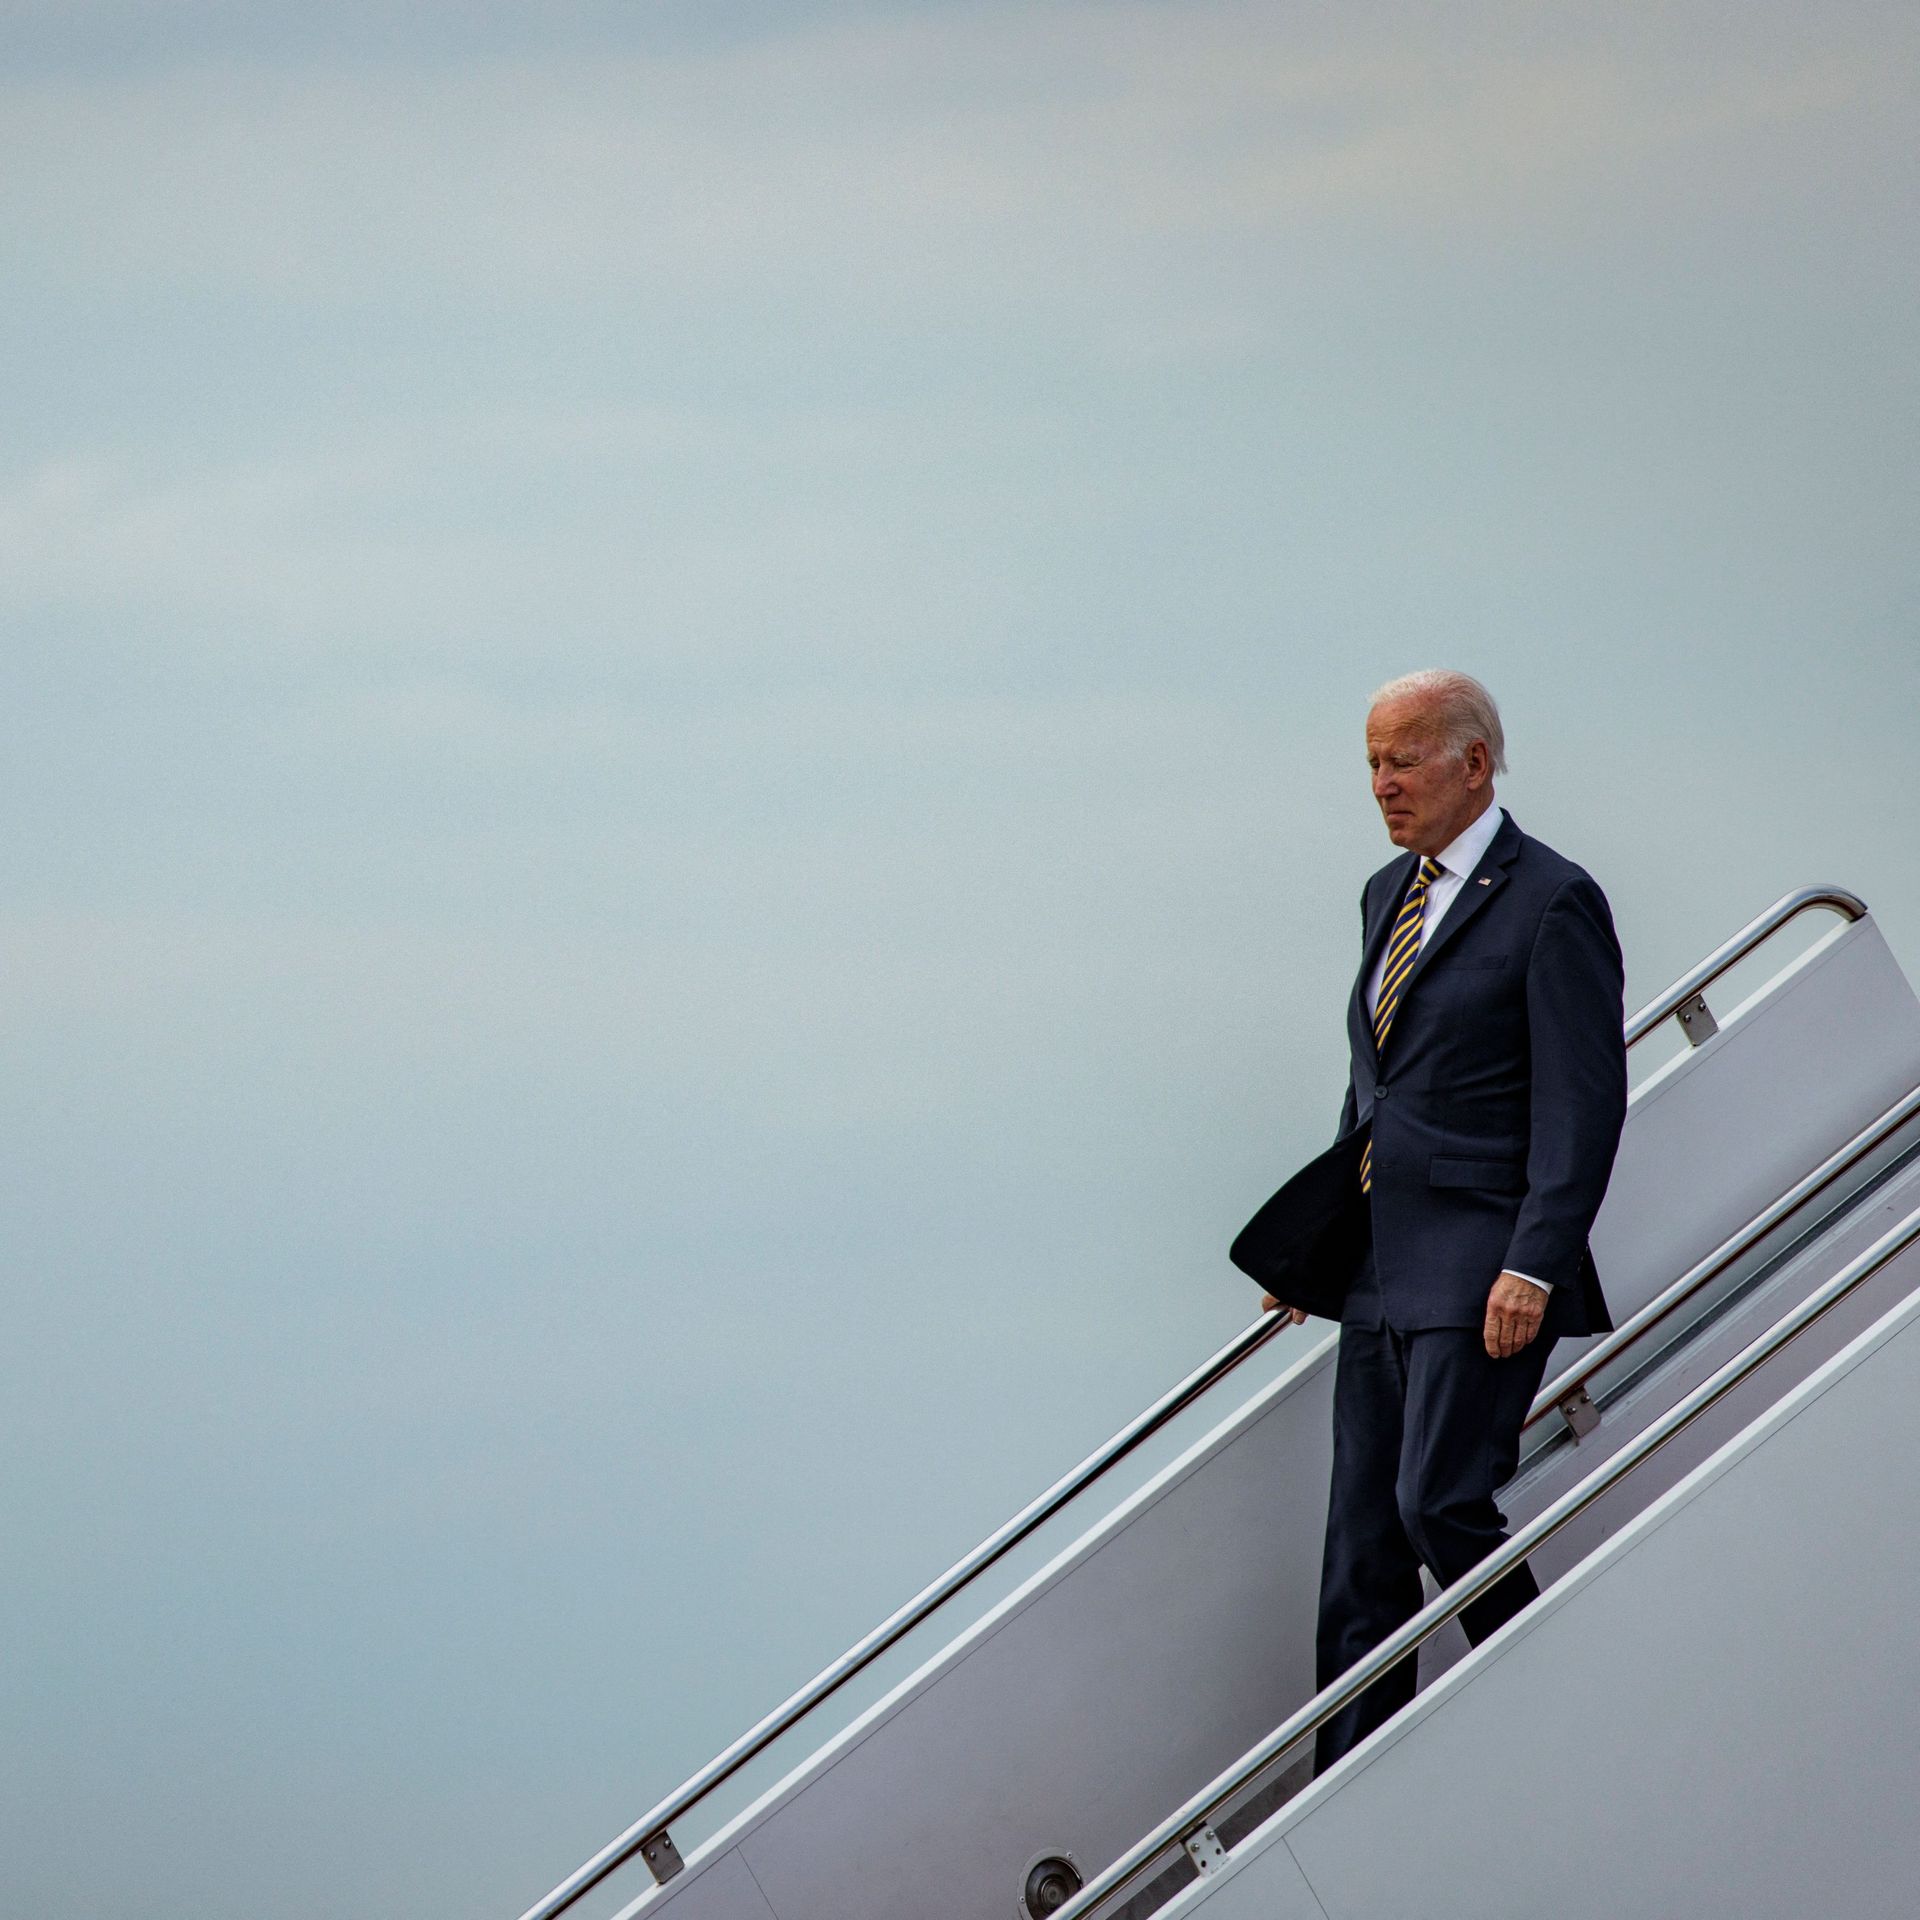 Biden walks down steps from Air Force One